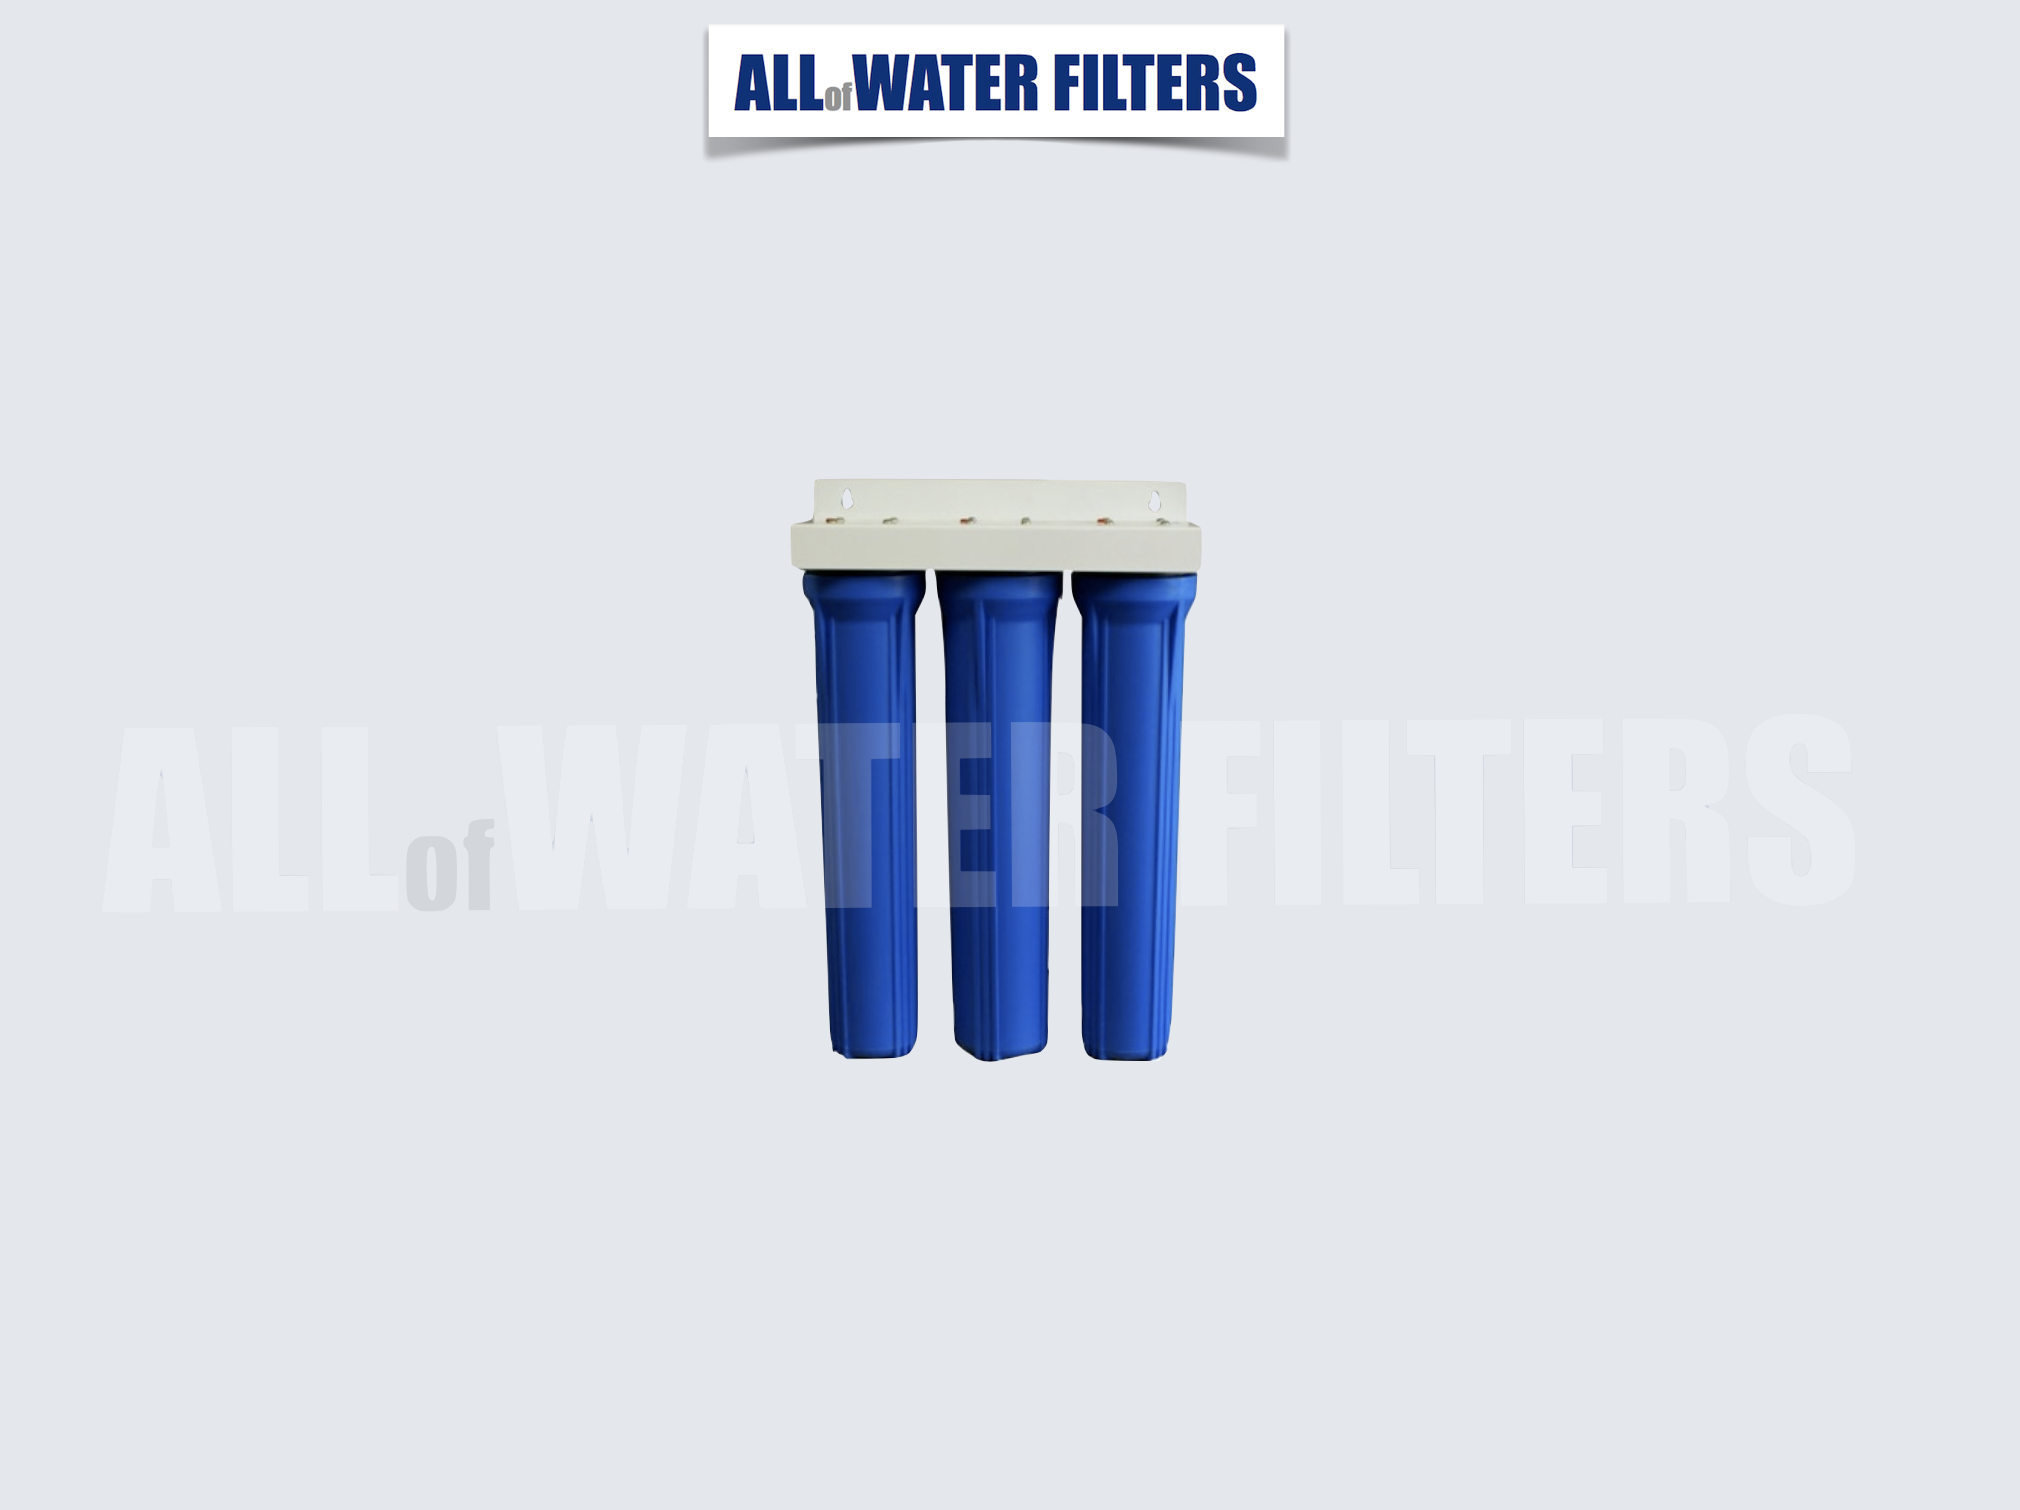 3-stage-whole-house-water-purifier